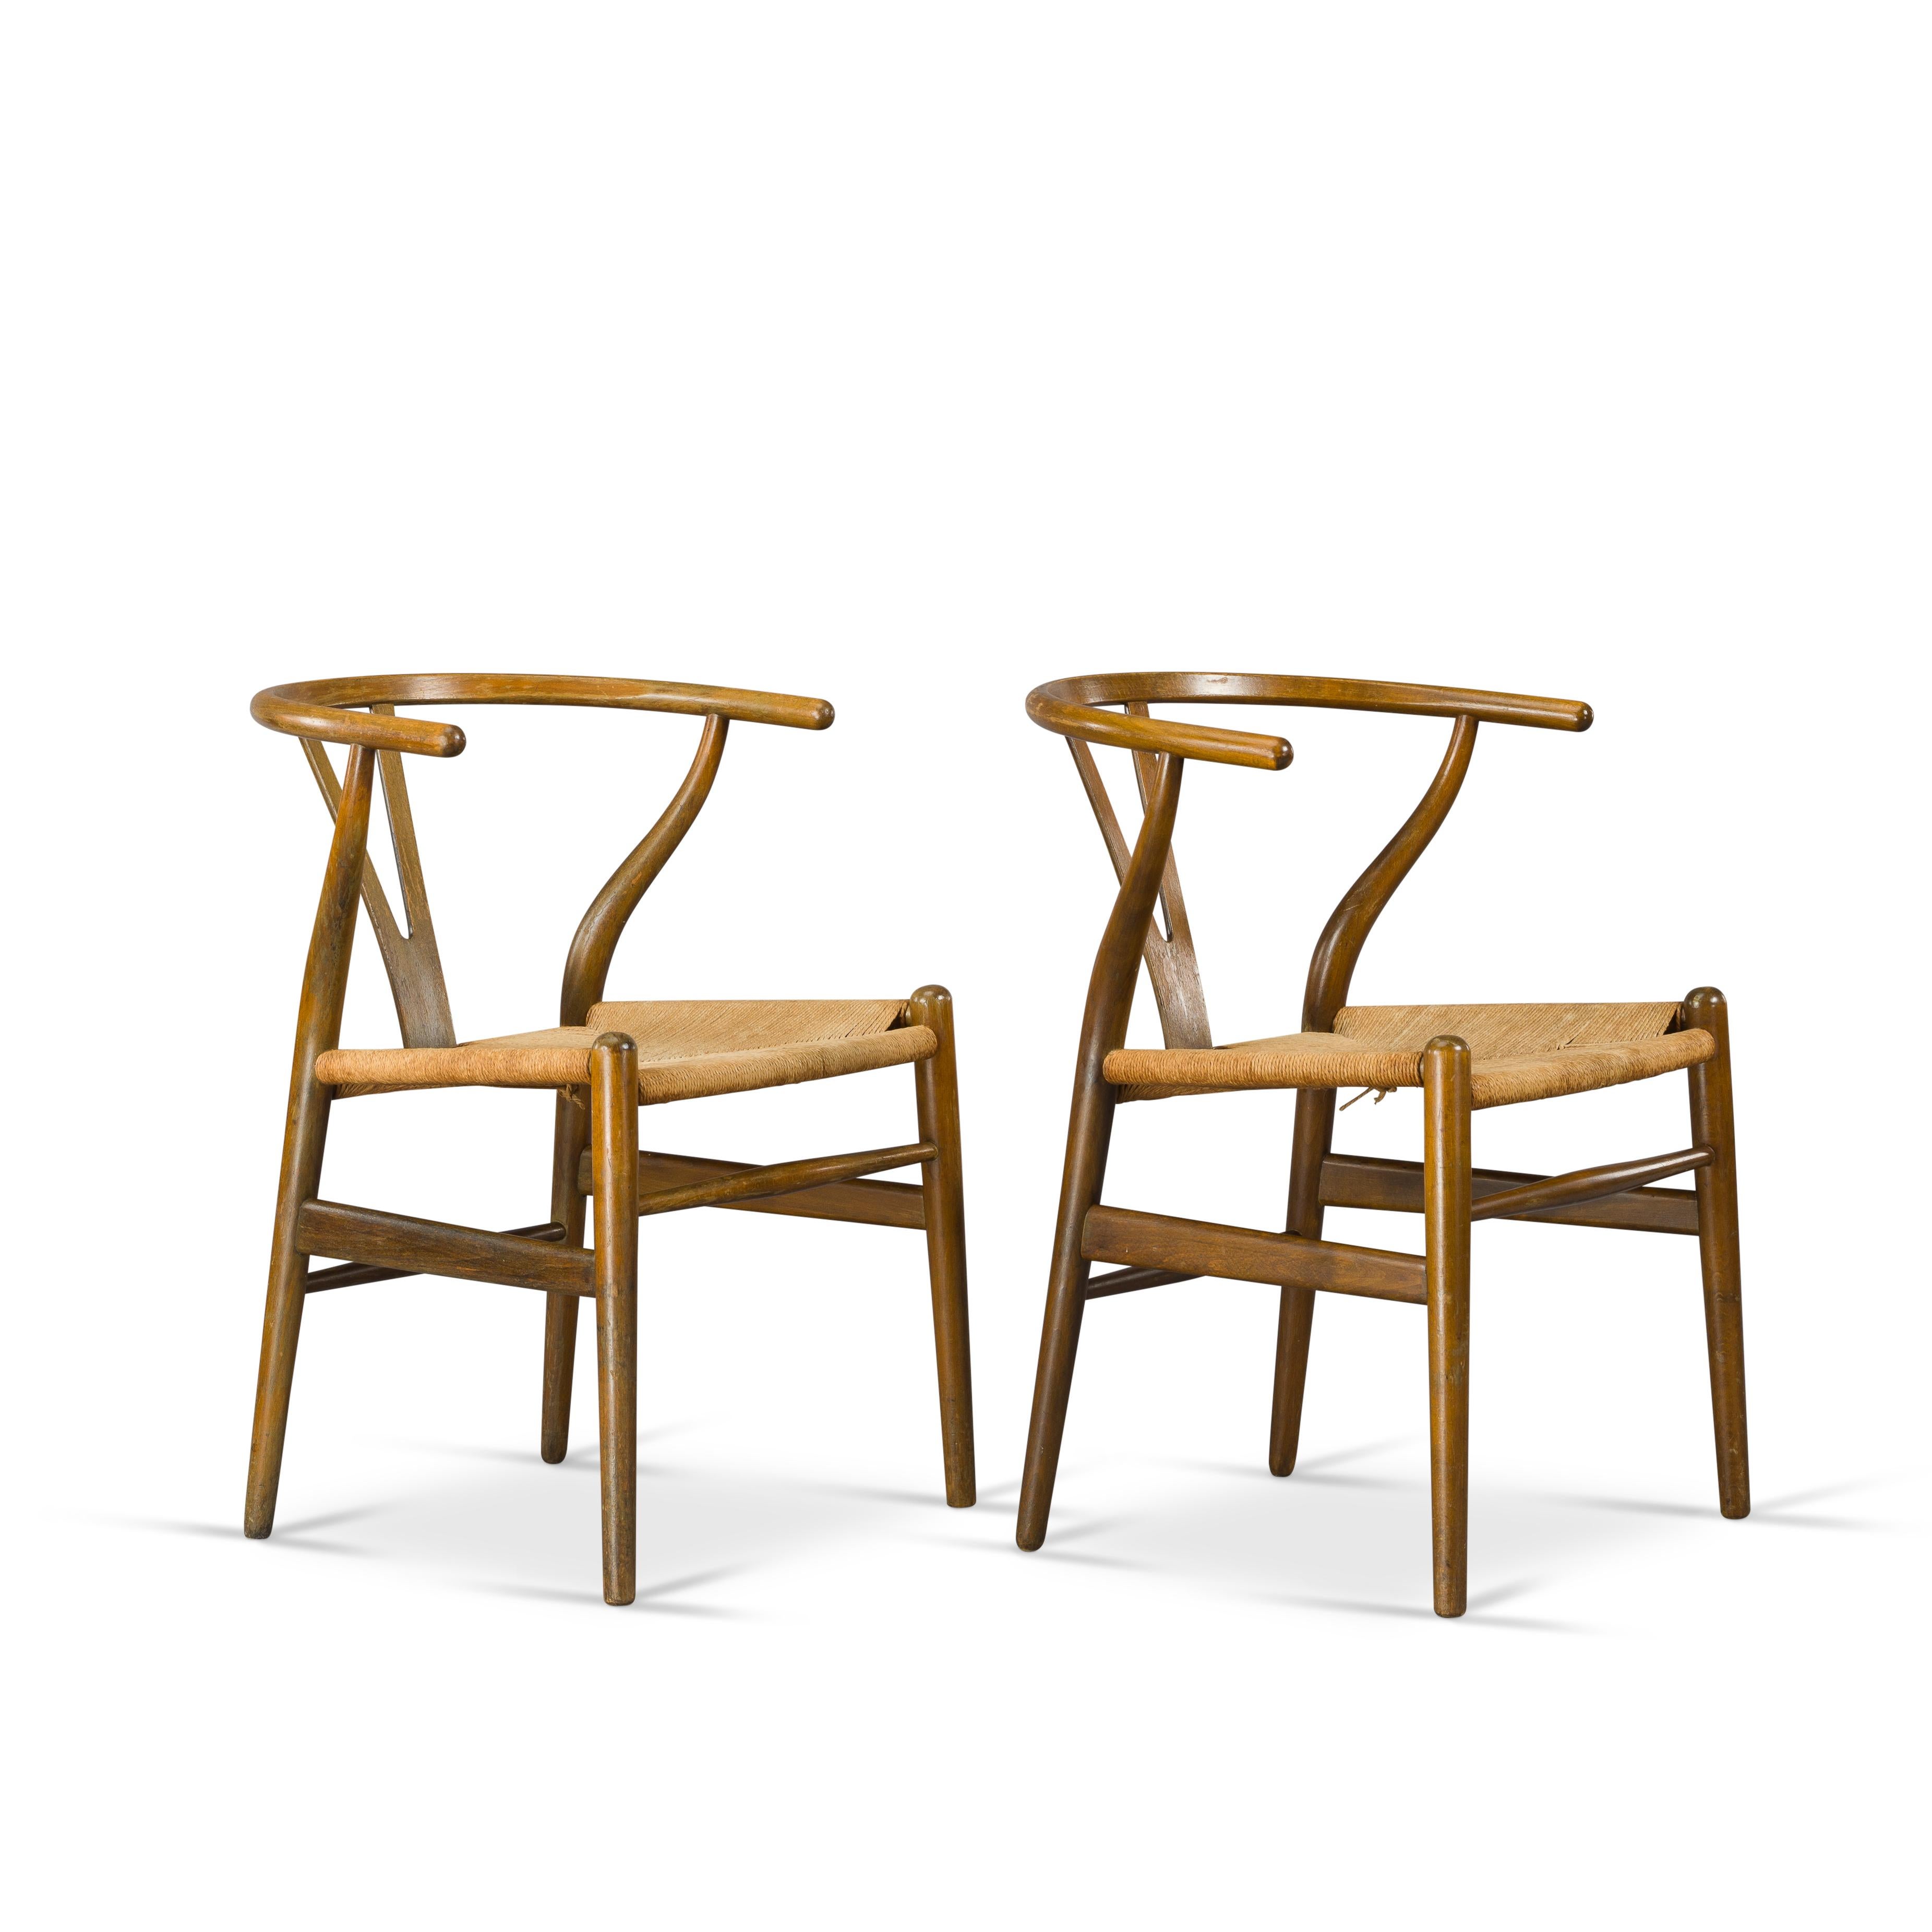 These two CH24 wishbone armchairs are designed by Hans J. Wegner. And produced in the 1950s by Carl Hansen & Søn in Denmark. The frame is made from oak. These chairs were painted originally and time has worn off the paint in a nice patina. The